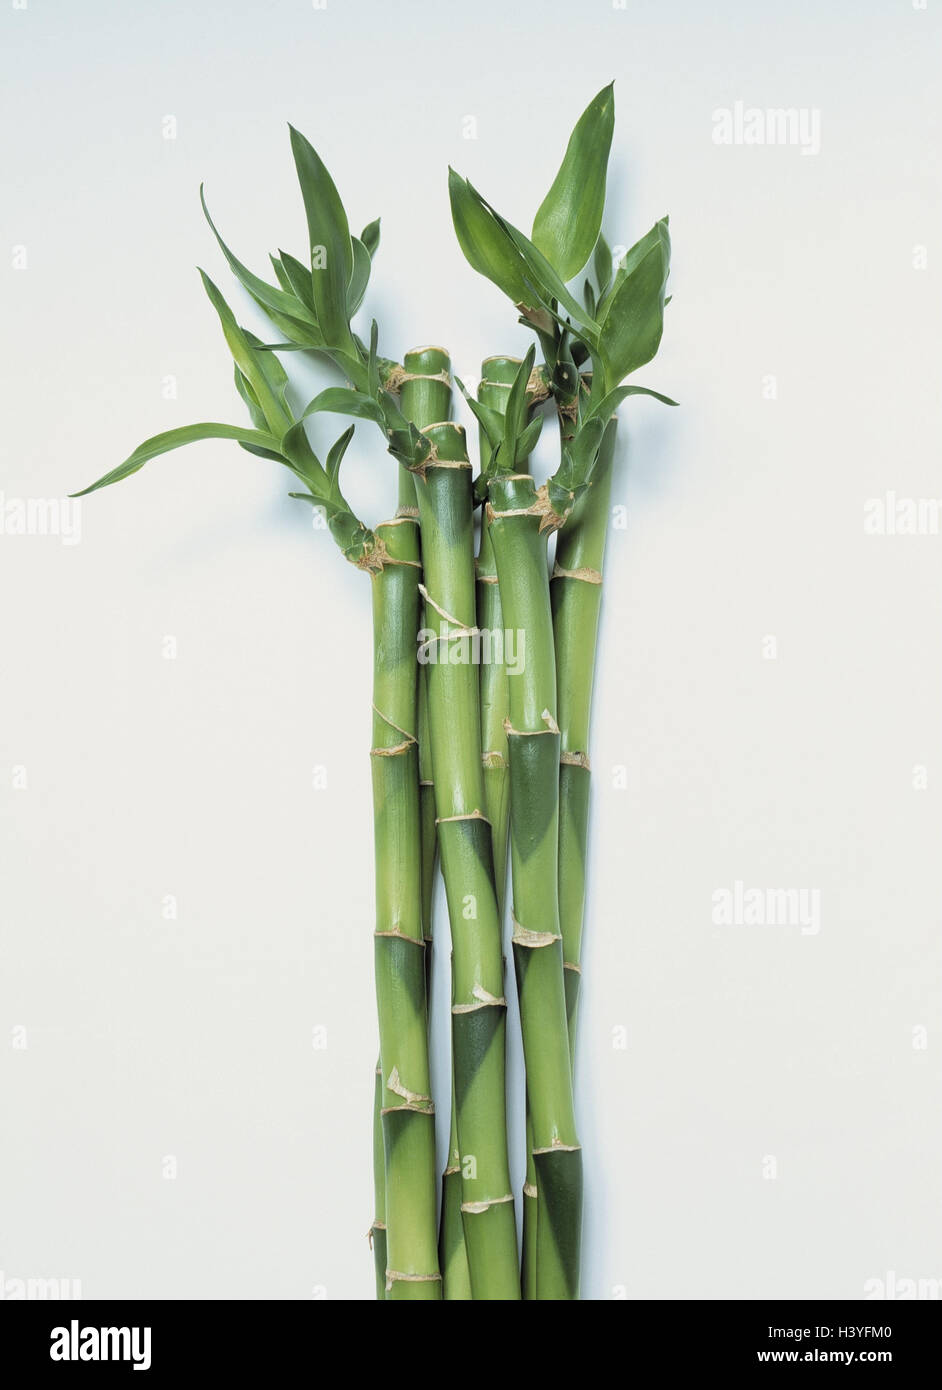 Luck bamboo, Dracaena fragrans 'Stedneri', ornamental plant, plants, green, stalk, just, leaves, instincts, green plant, indoor plant, 'Lucky Bamboo', icon, luck, success, health, Feng Shui, luck bringer, product photography, Still life, cut out, Stock Photo